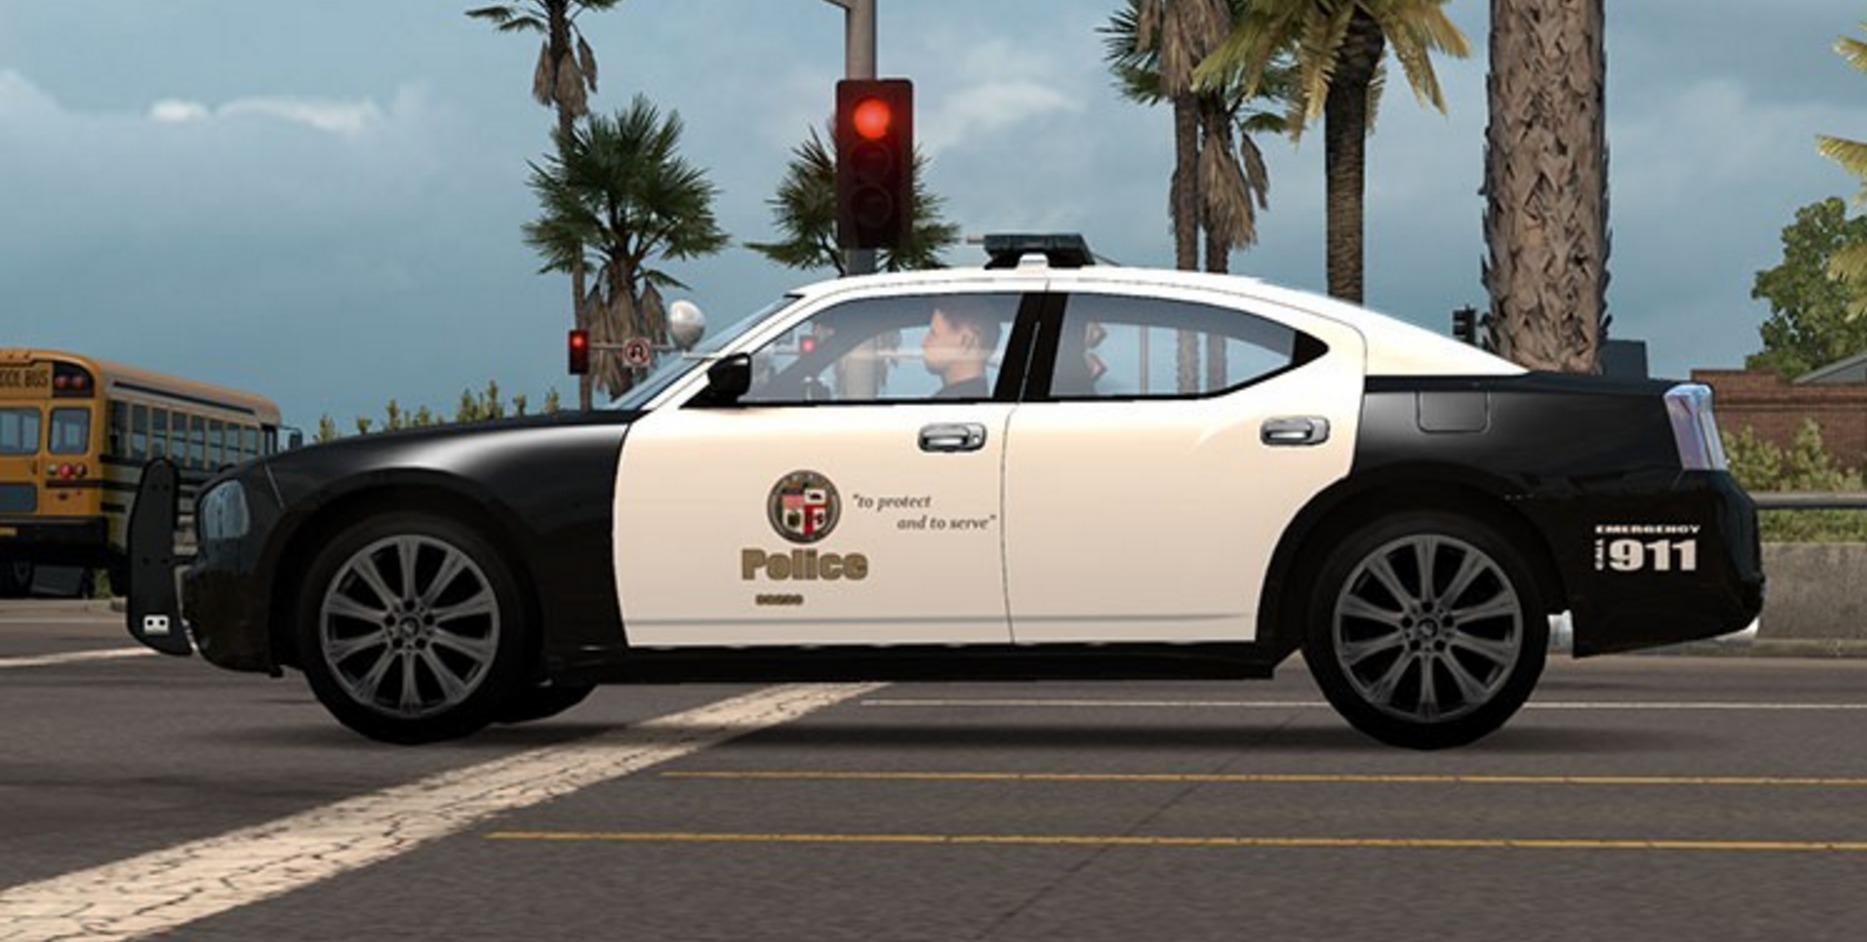 ai-police-dodge-charger-for-ats-2.jpeg